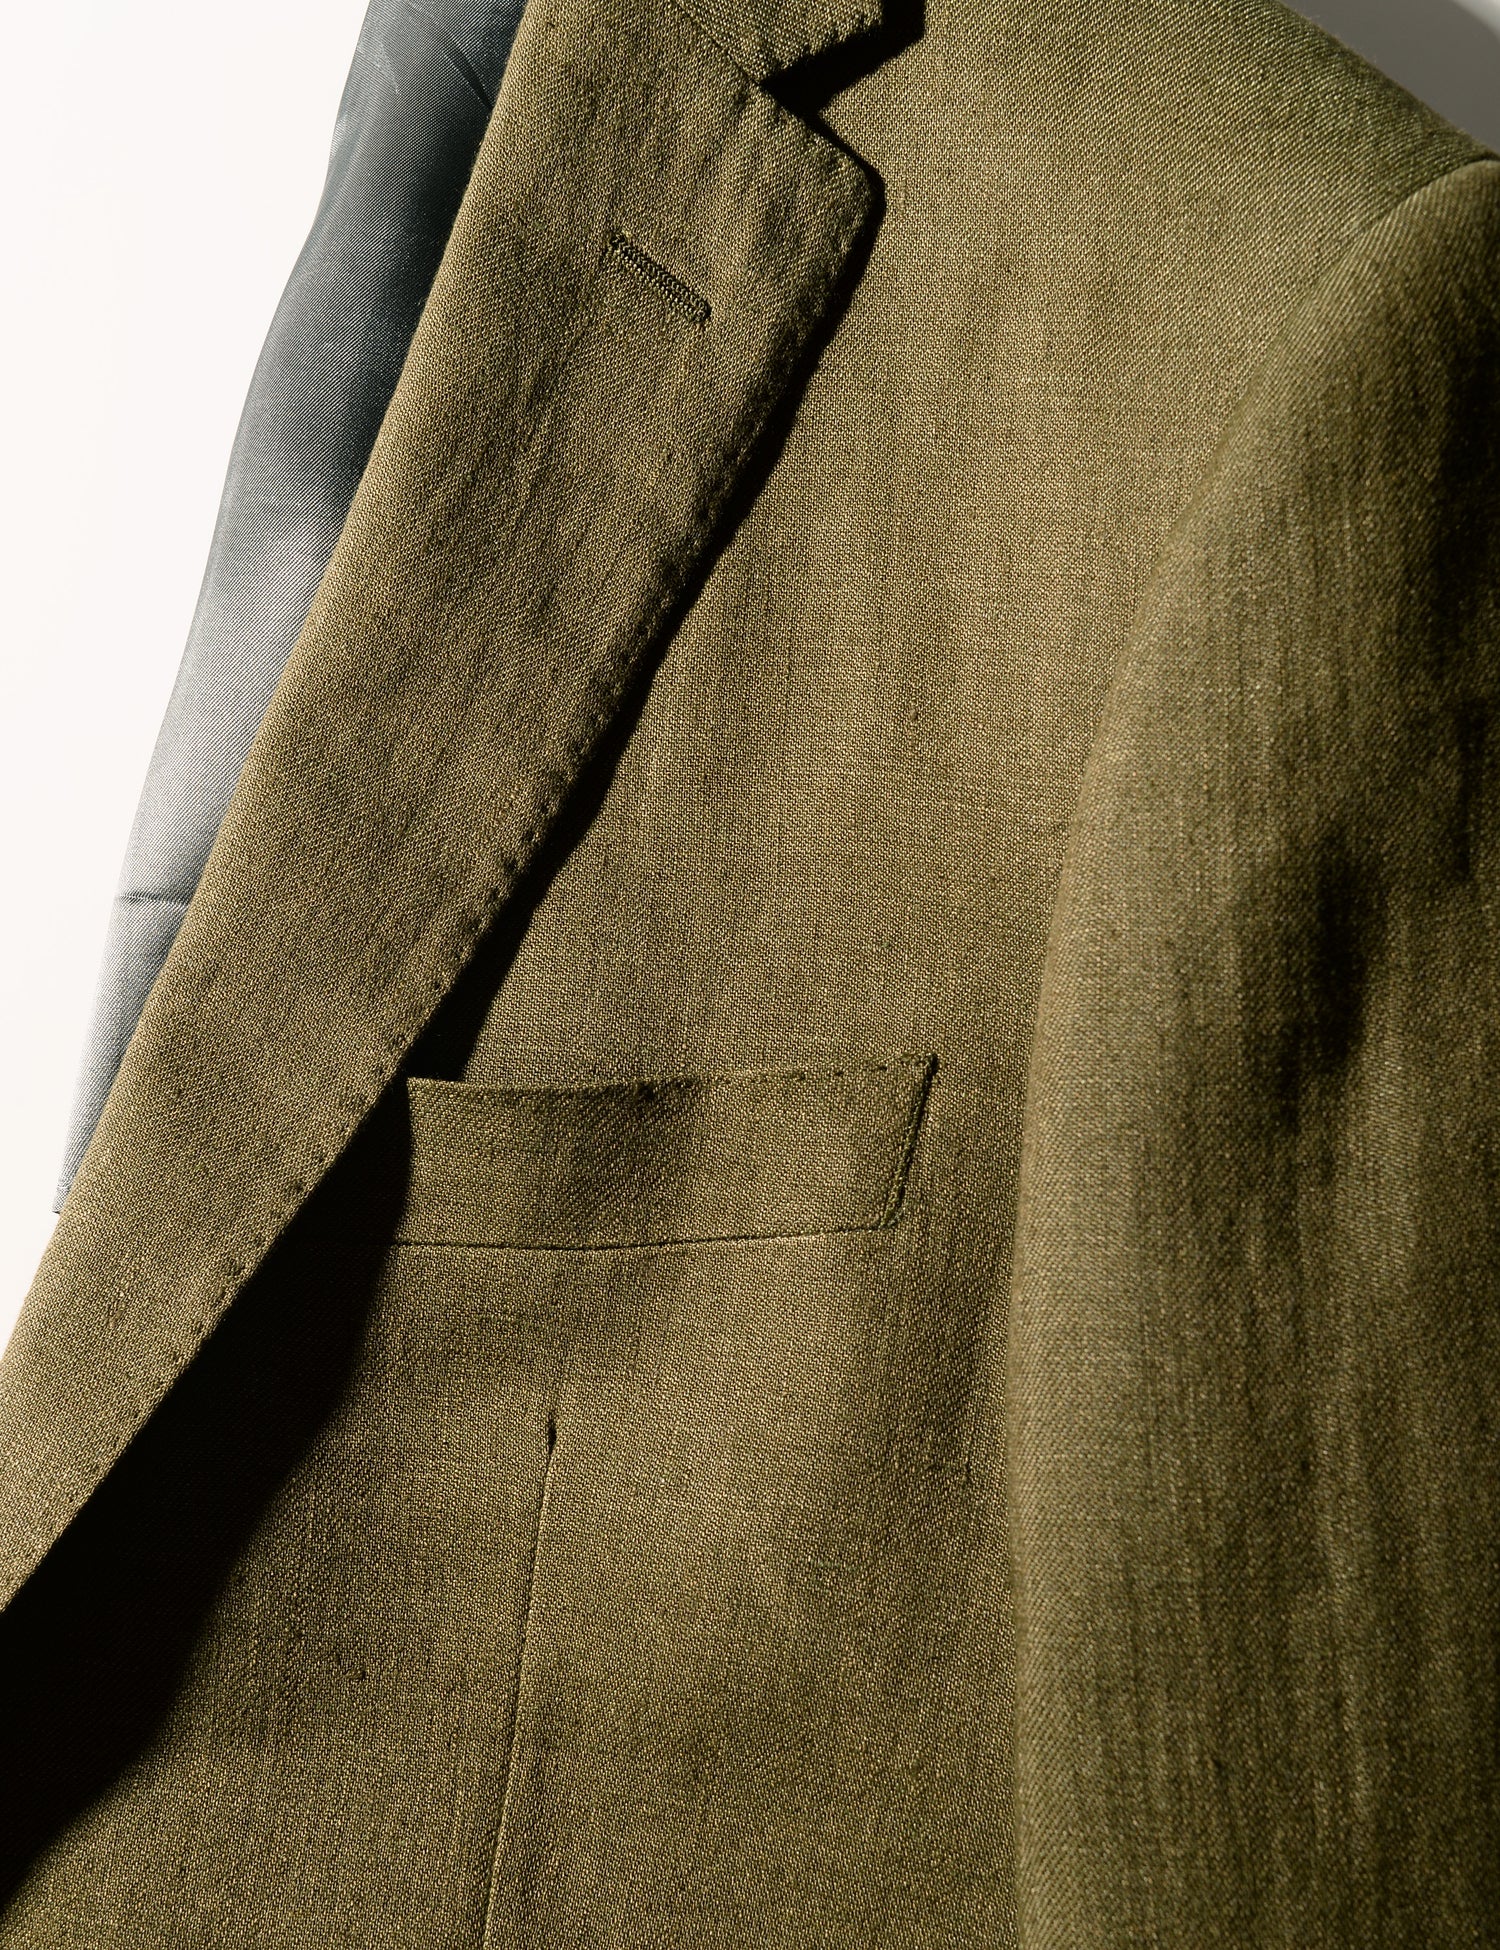 Detail shot of Brooklyn Tailors BKT50 Tailored Jacket in Linen Twill - Moss showing lapel, chest pocket